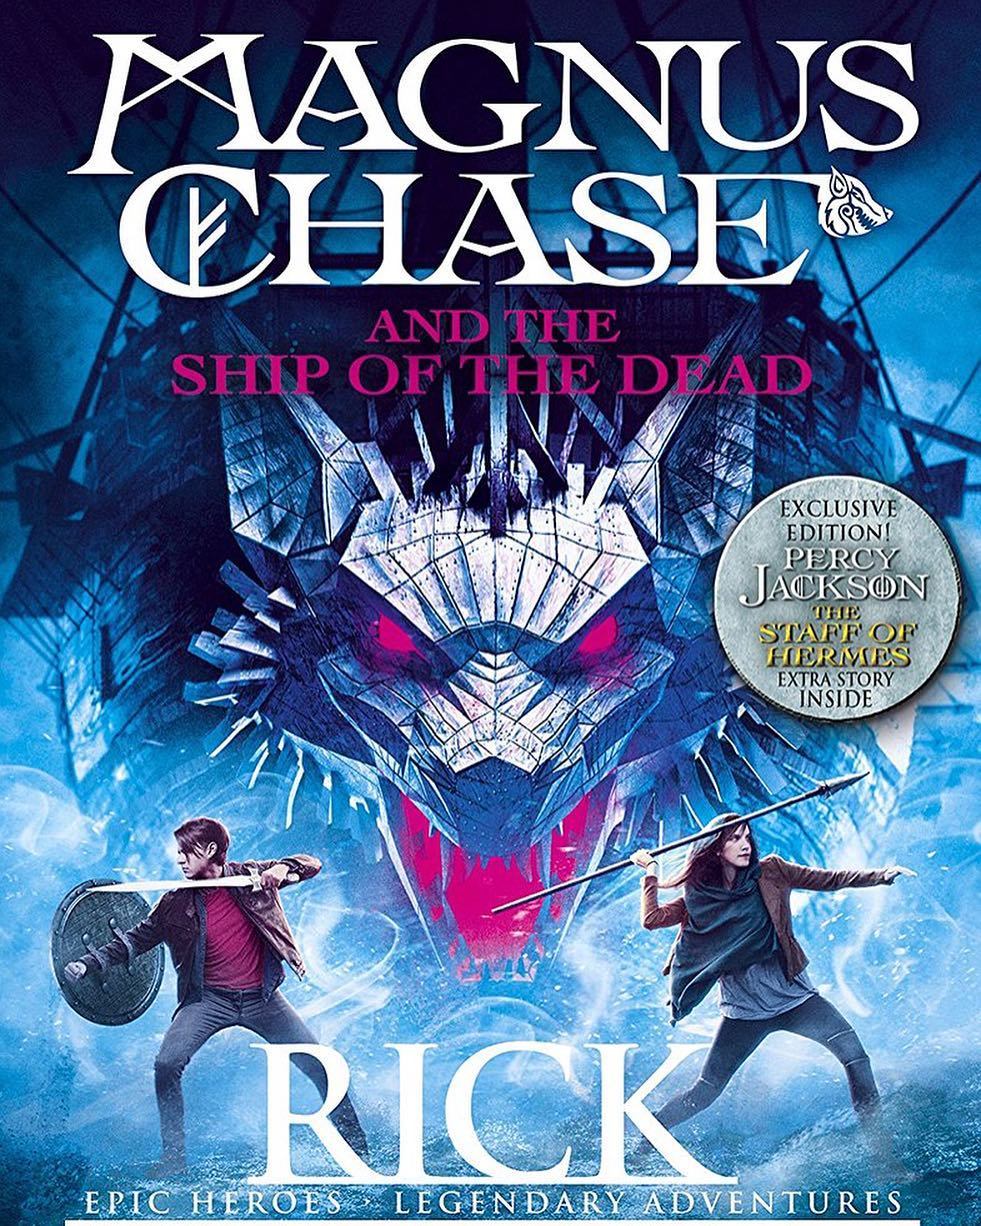 magnus chase ship of the dead